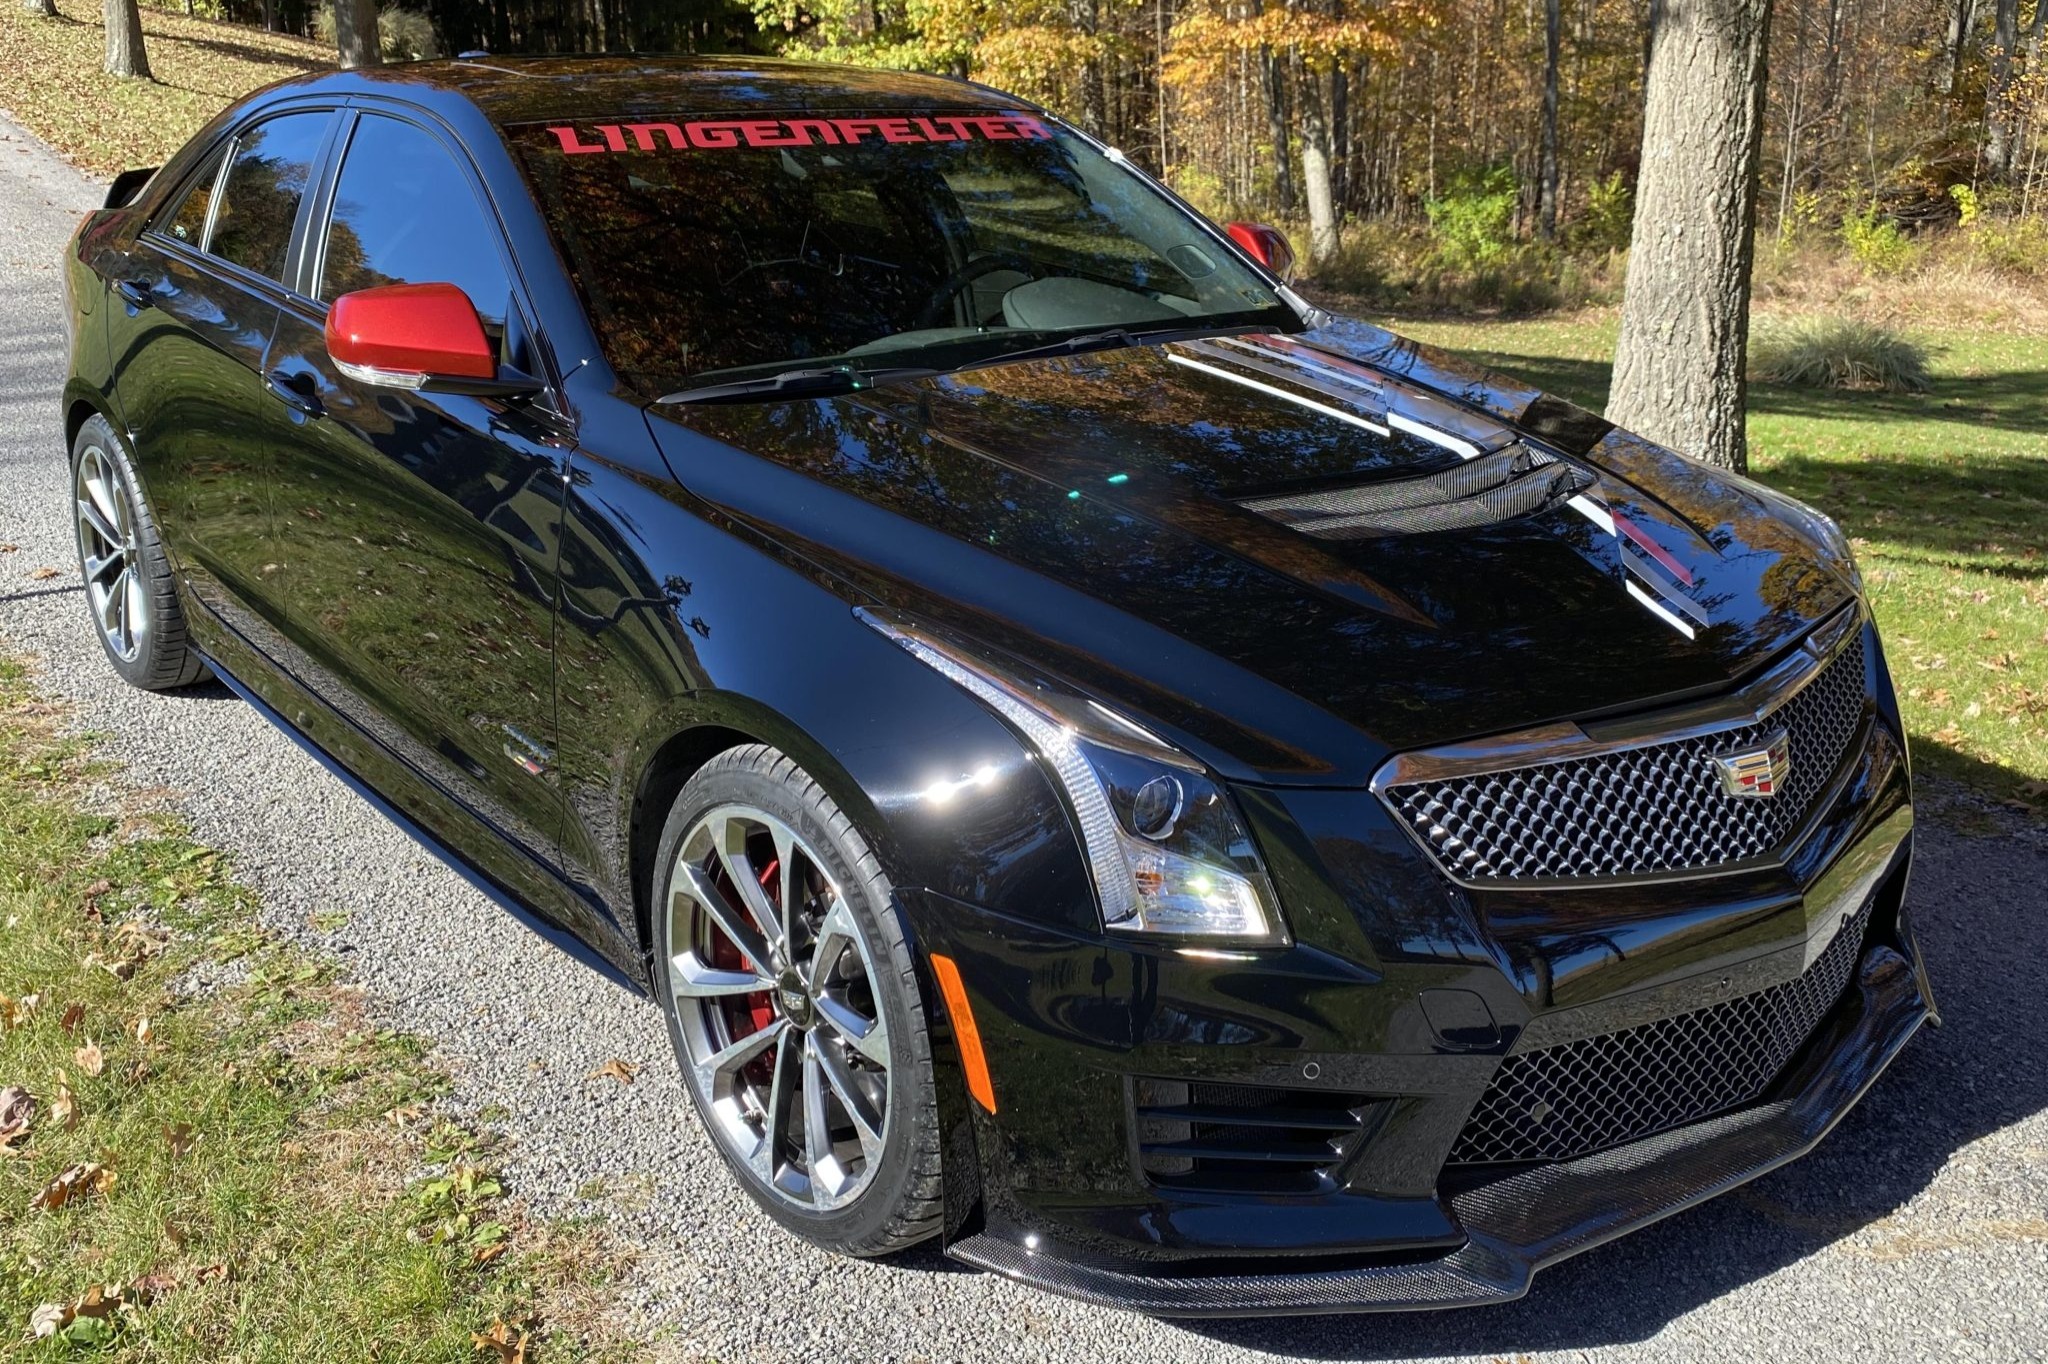 Lingenfelter-Modified 2018 Cadillac ATS-V Sedan Championship Edition for  sale on BaT Auctions - closed on November 7, 2022 (Lot #89,930) | Bring a  Trailer